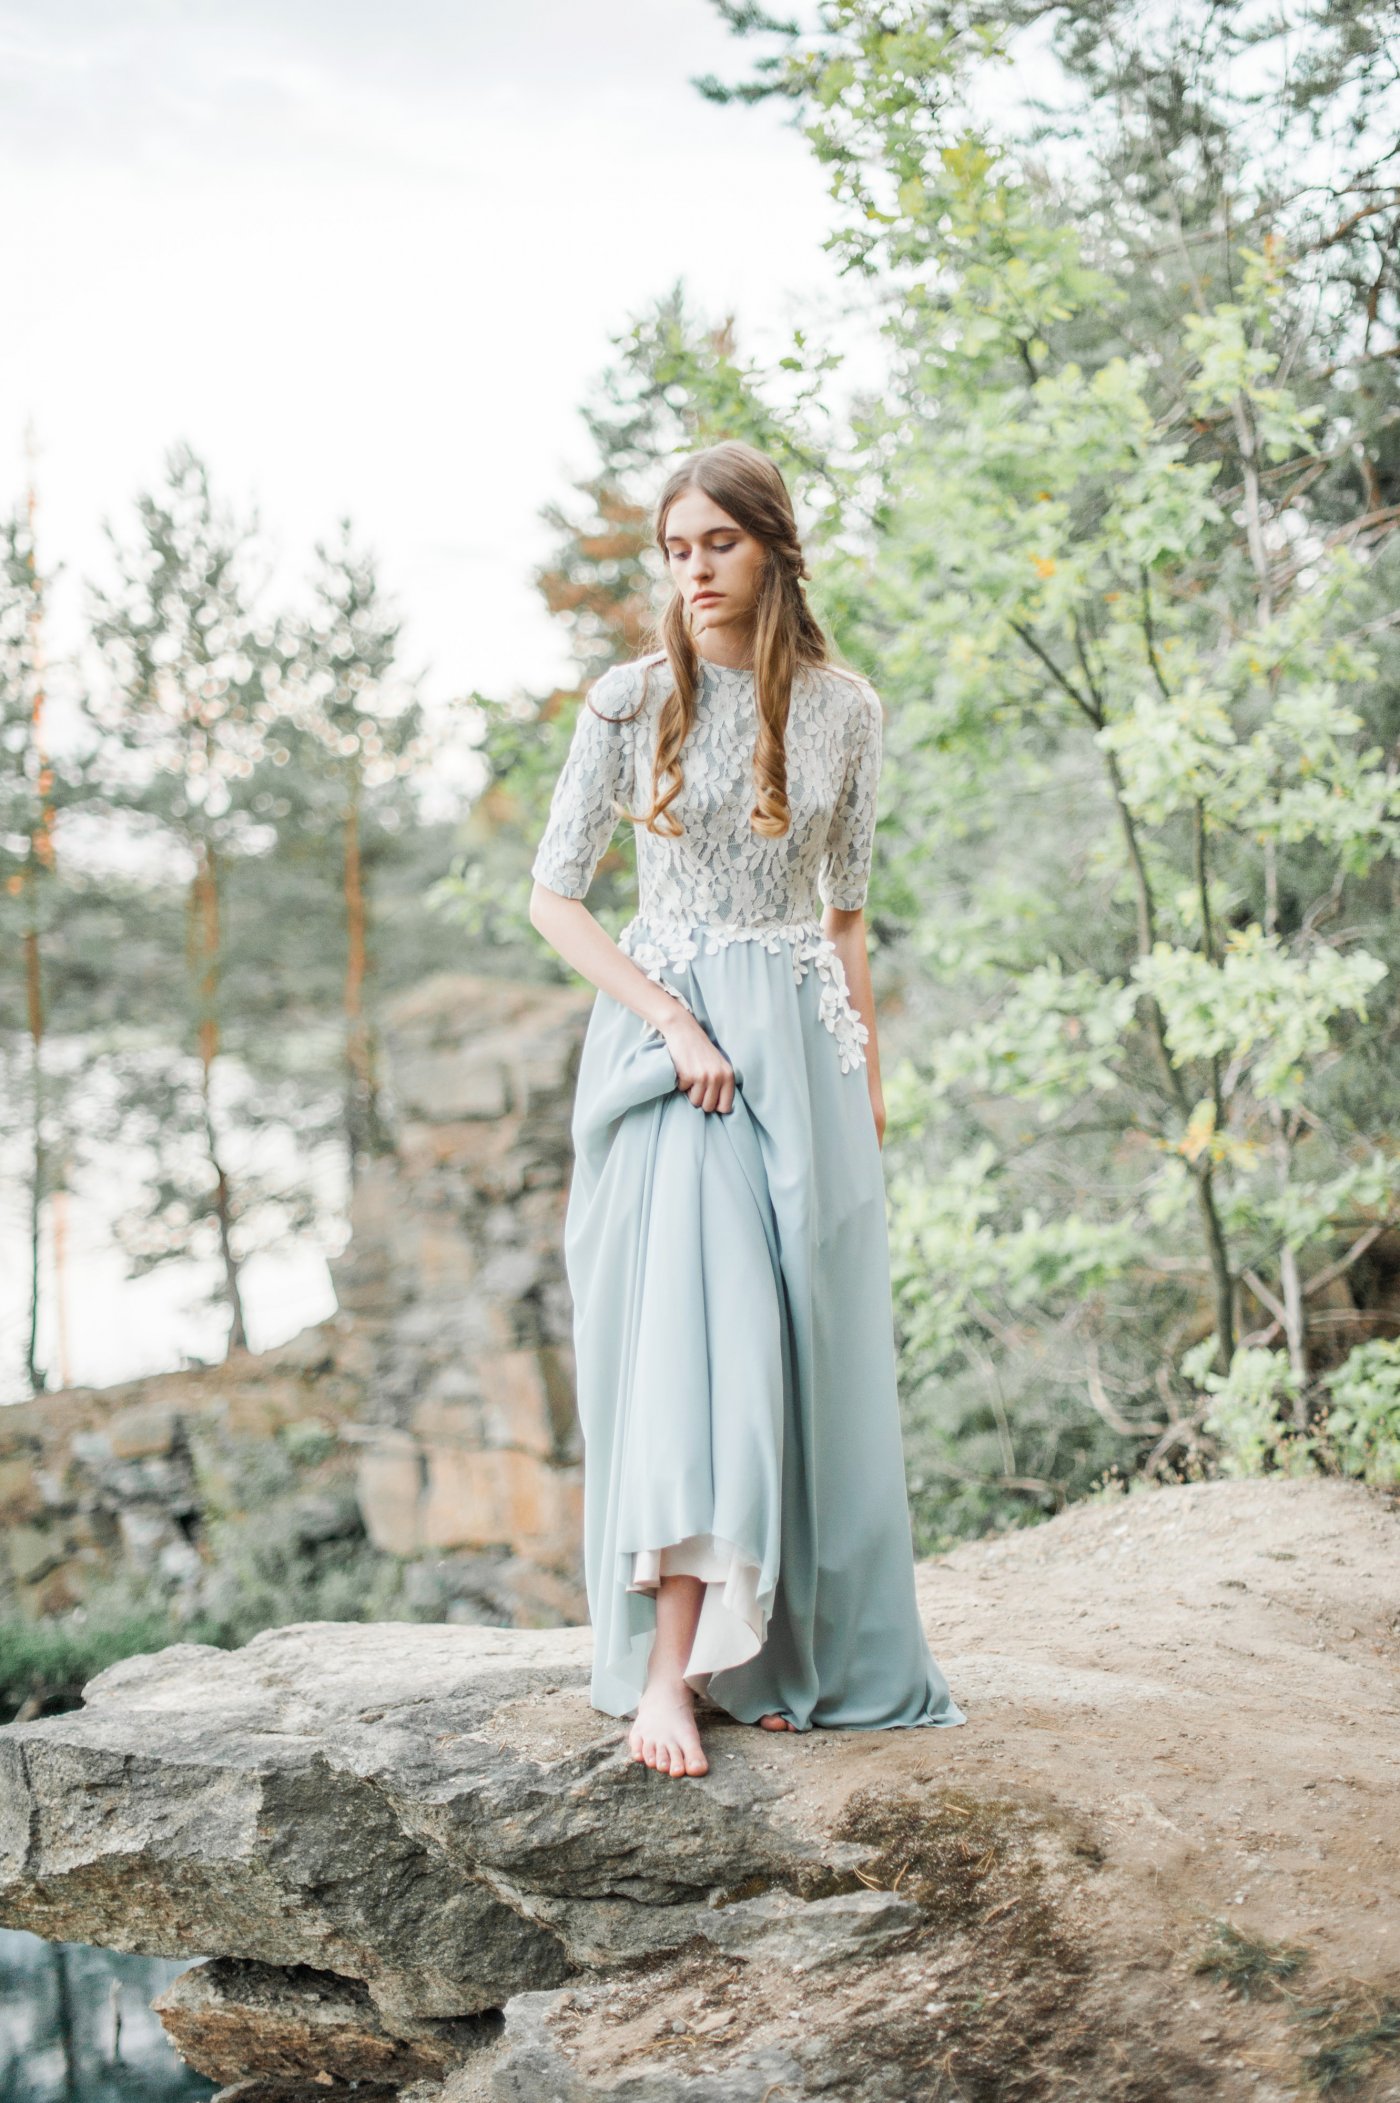 Sage green a-line wedding dress with lace bodice | Cathy Telle